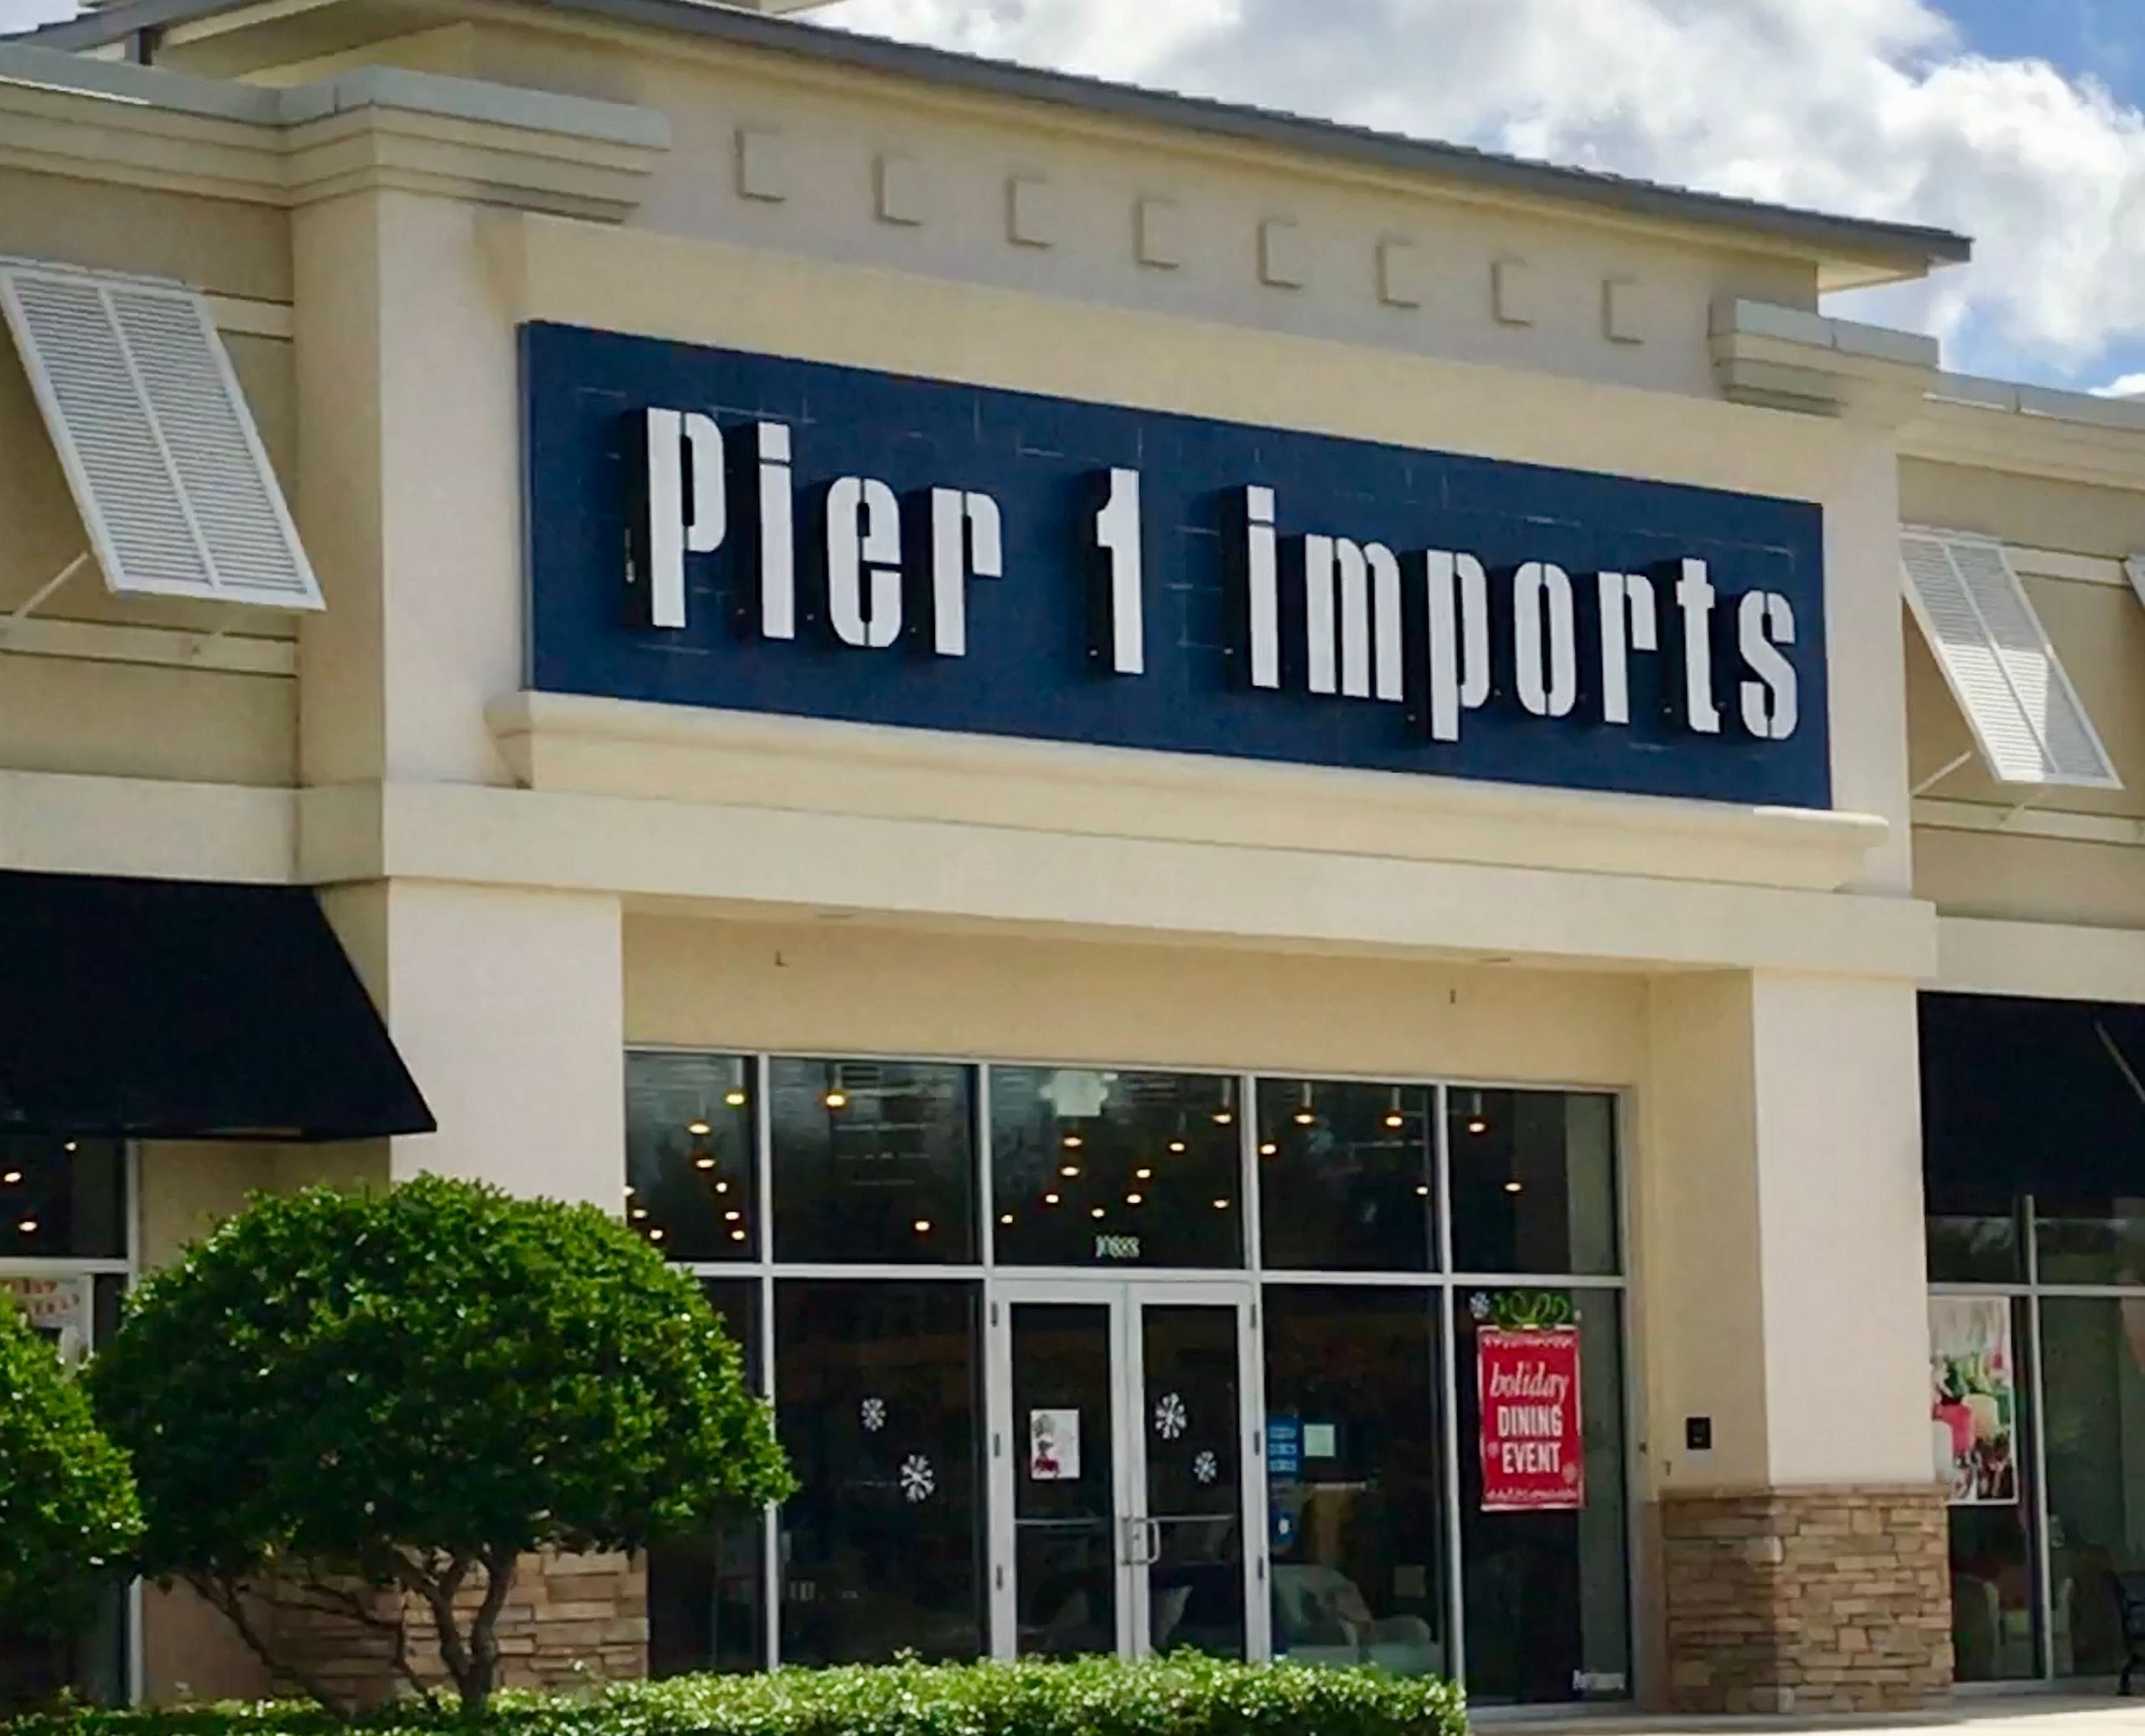 Pier 1 Imports files for Chapter 11 protection